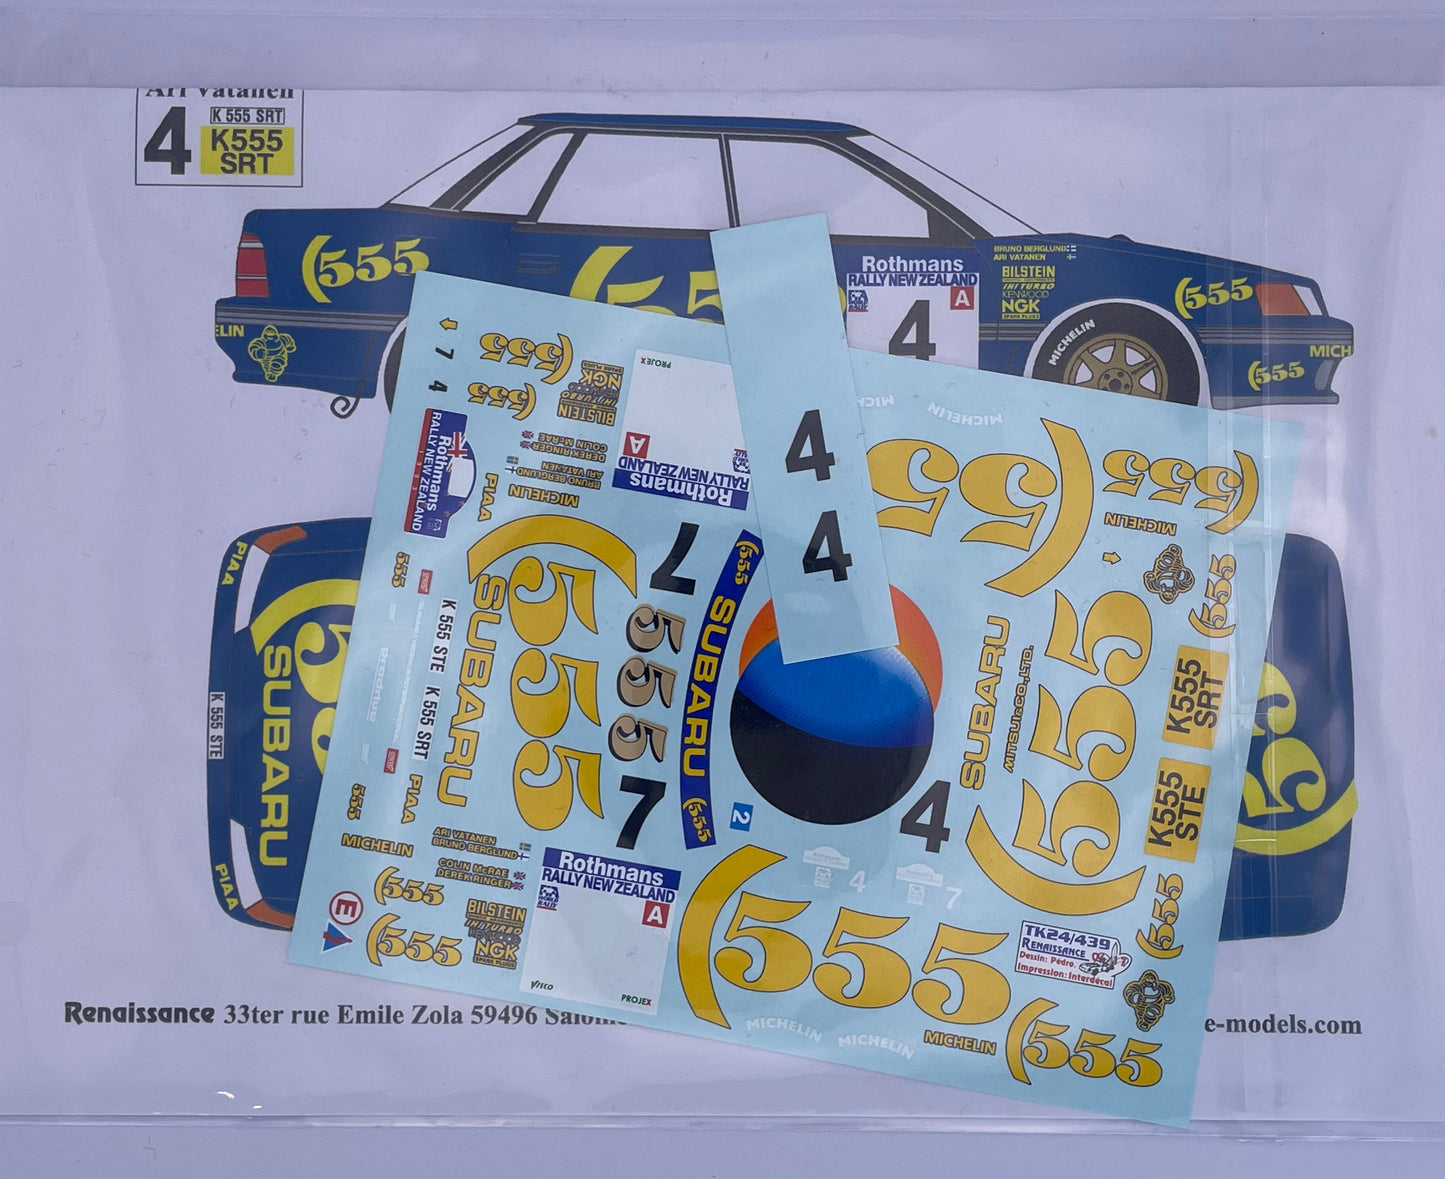 DECALS SUBARU LEGACY RS GR.A - RALLY NEW ZEALAND 1993